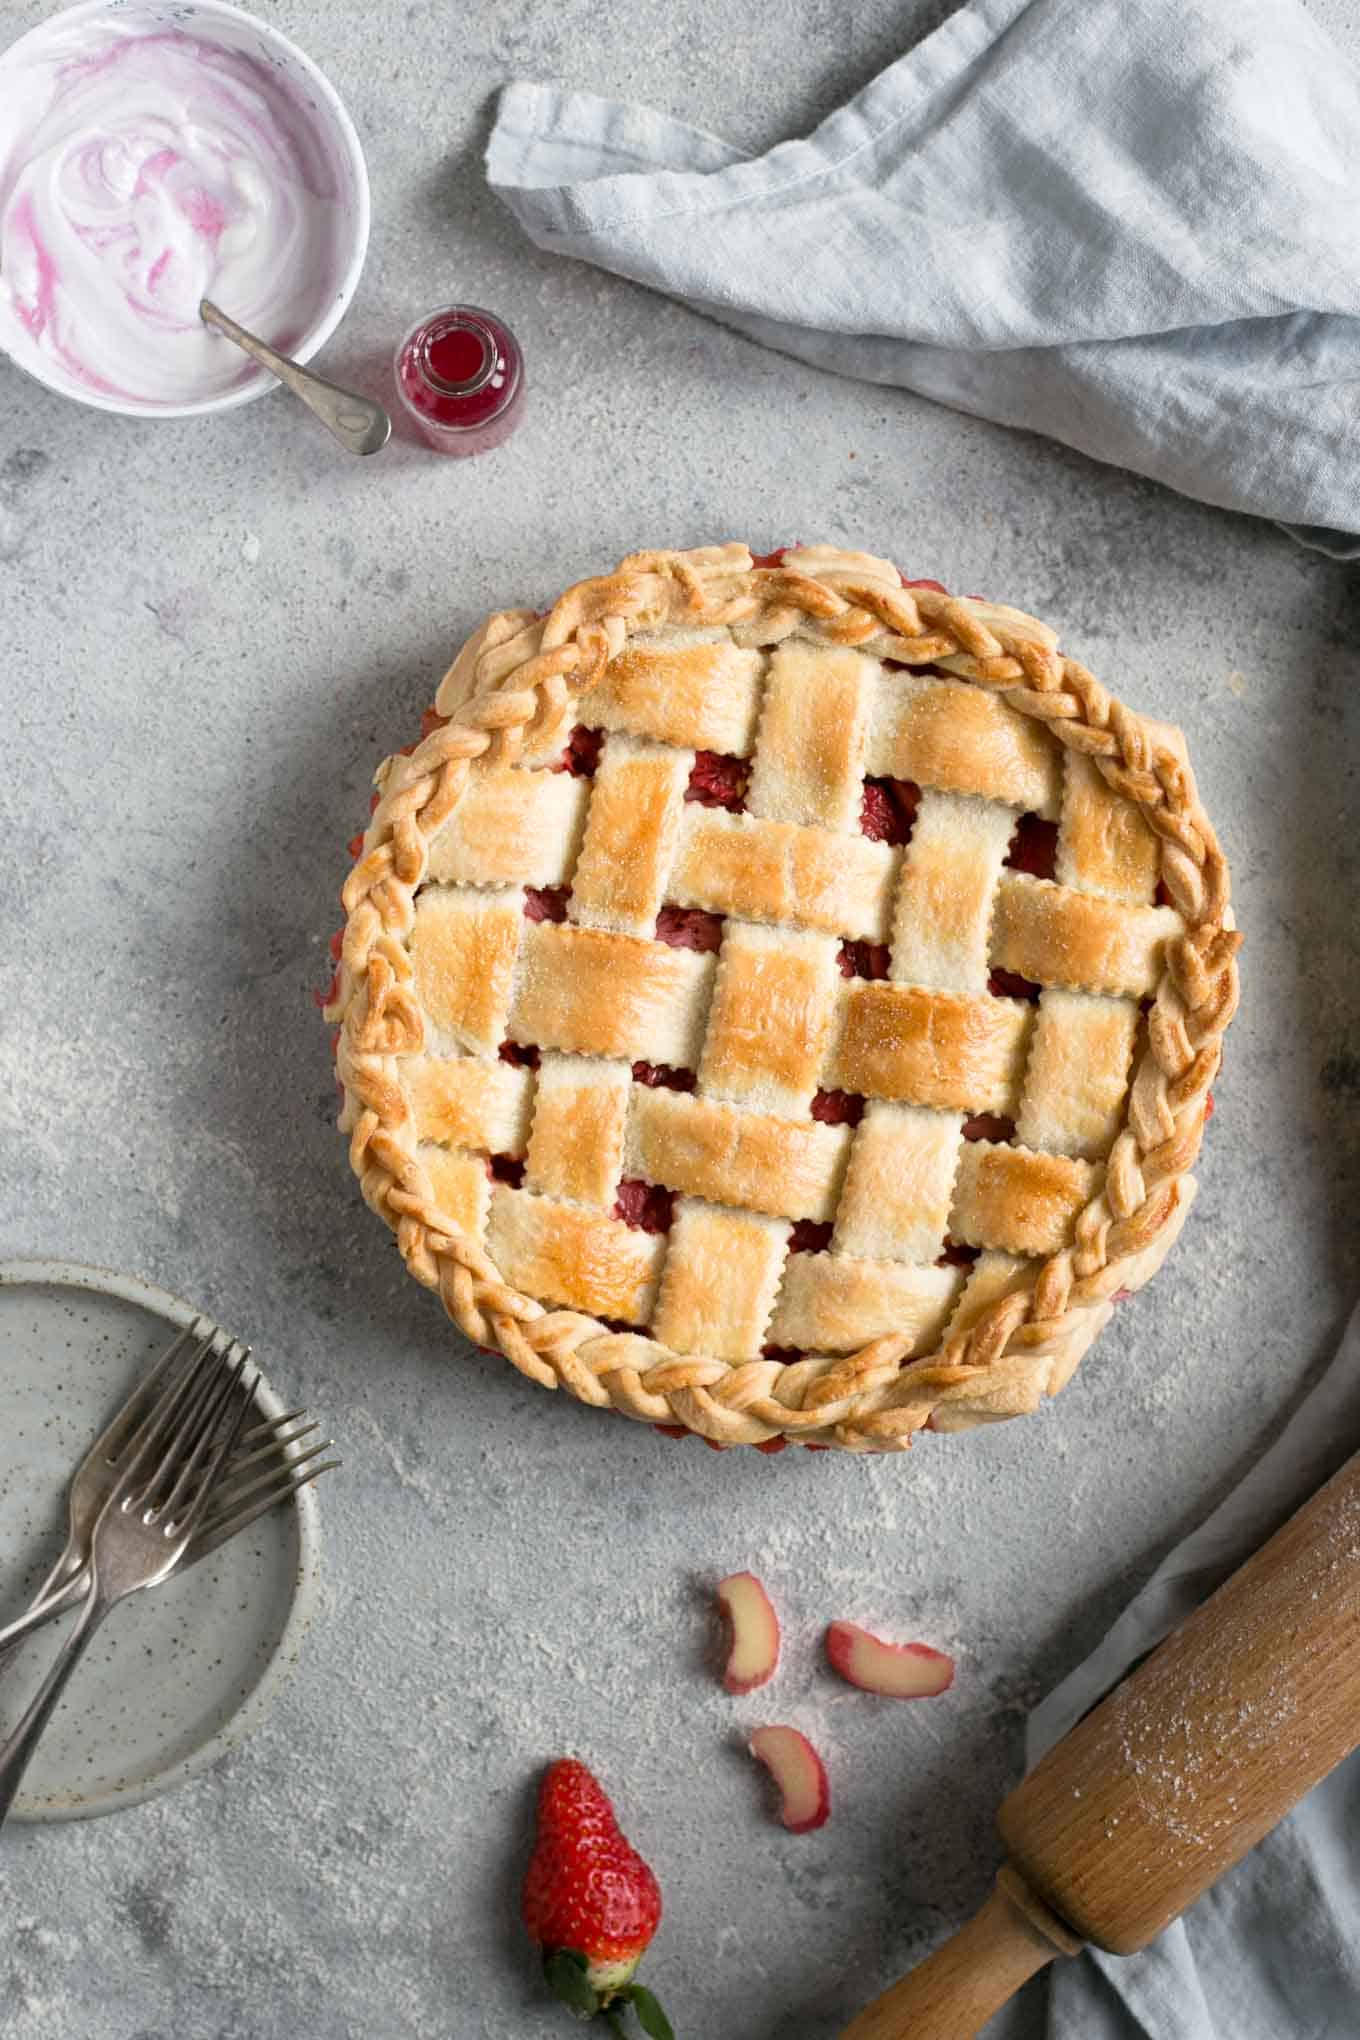 Lattice pie with rhubarb and strawberries. Easy recipe for a delicious classic! #dairyfree #rhubarb #vegetarian #pie | via @annabanana.co